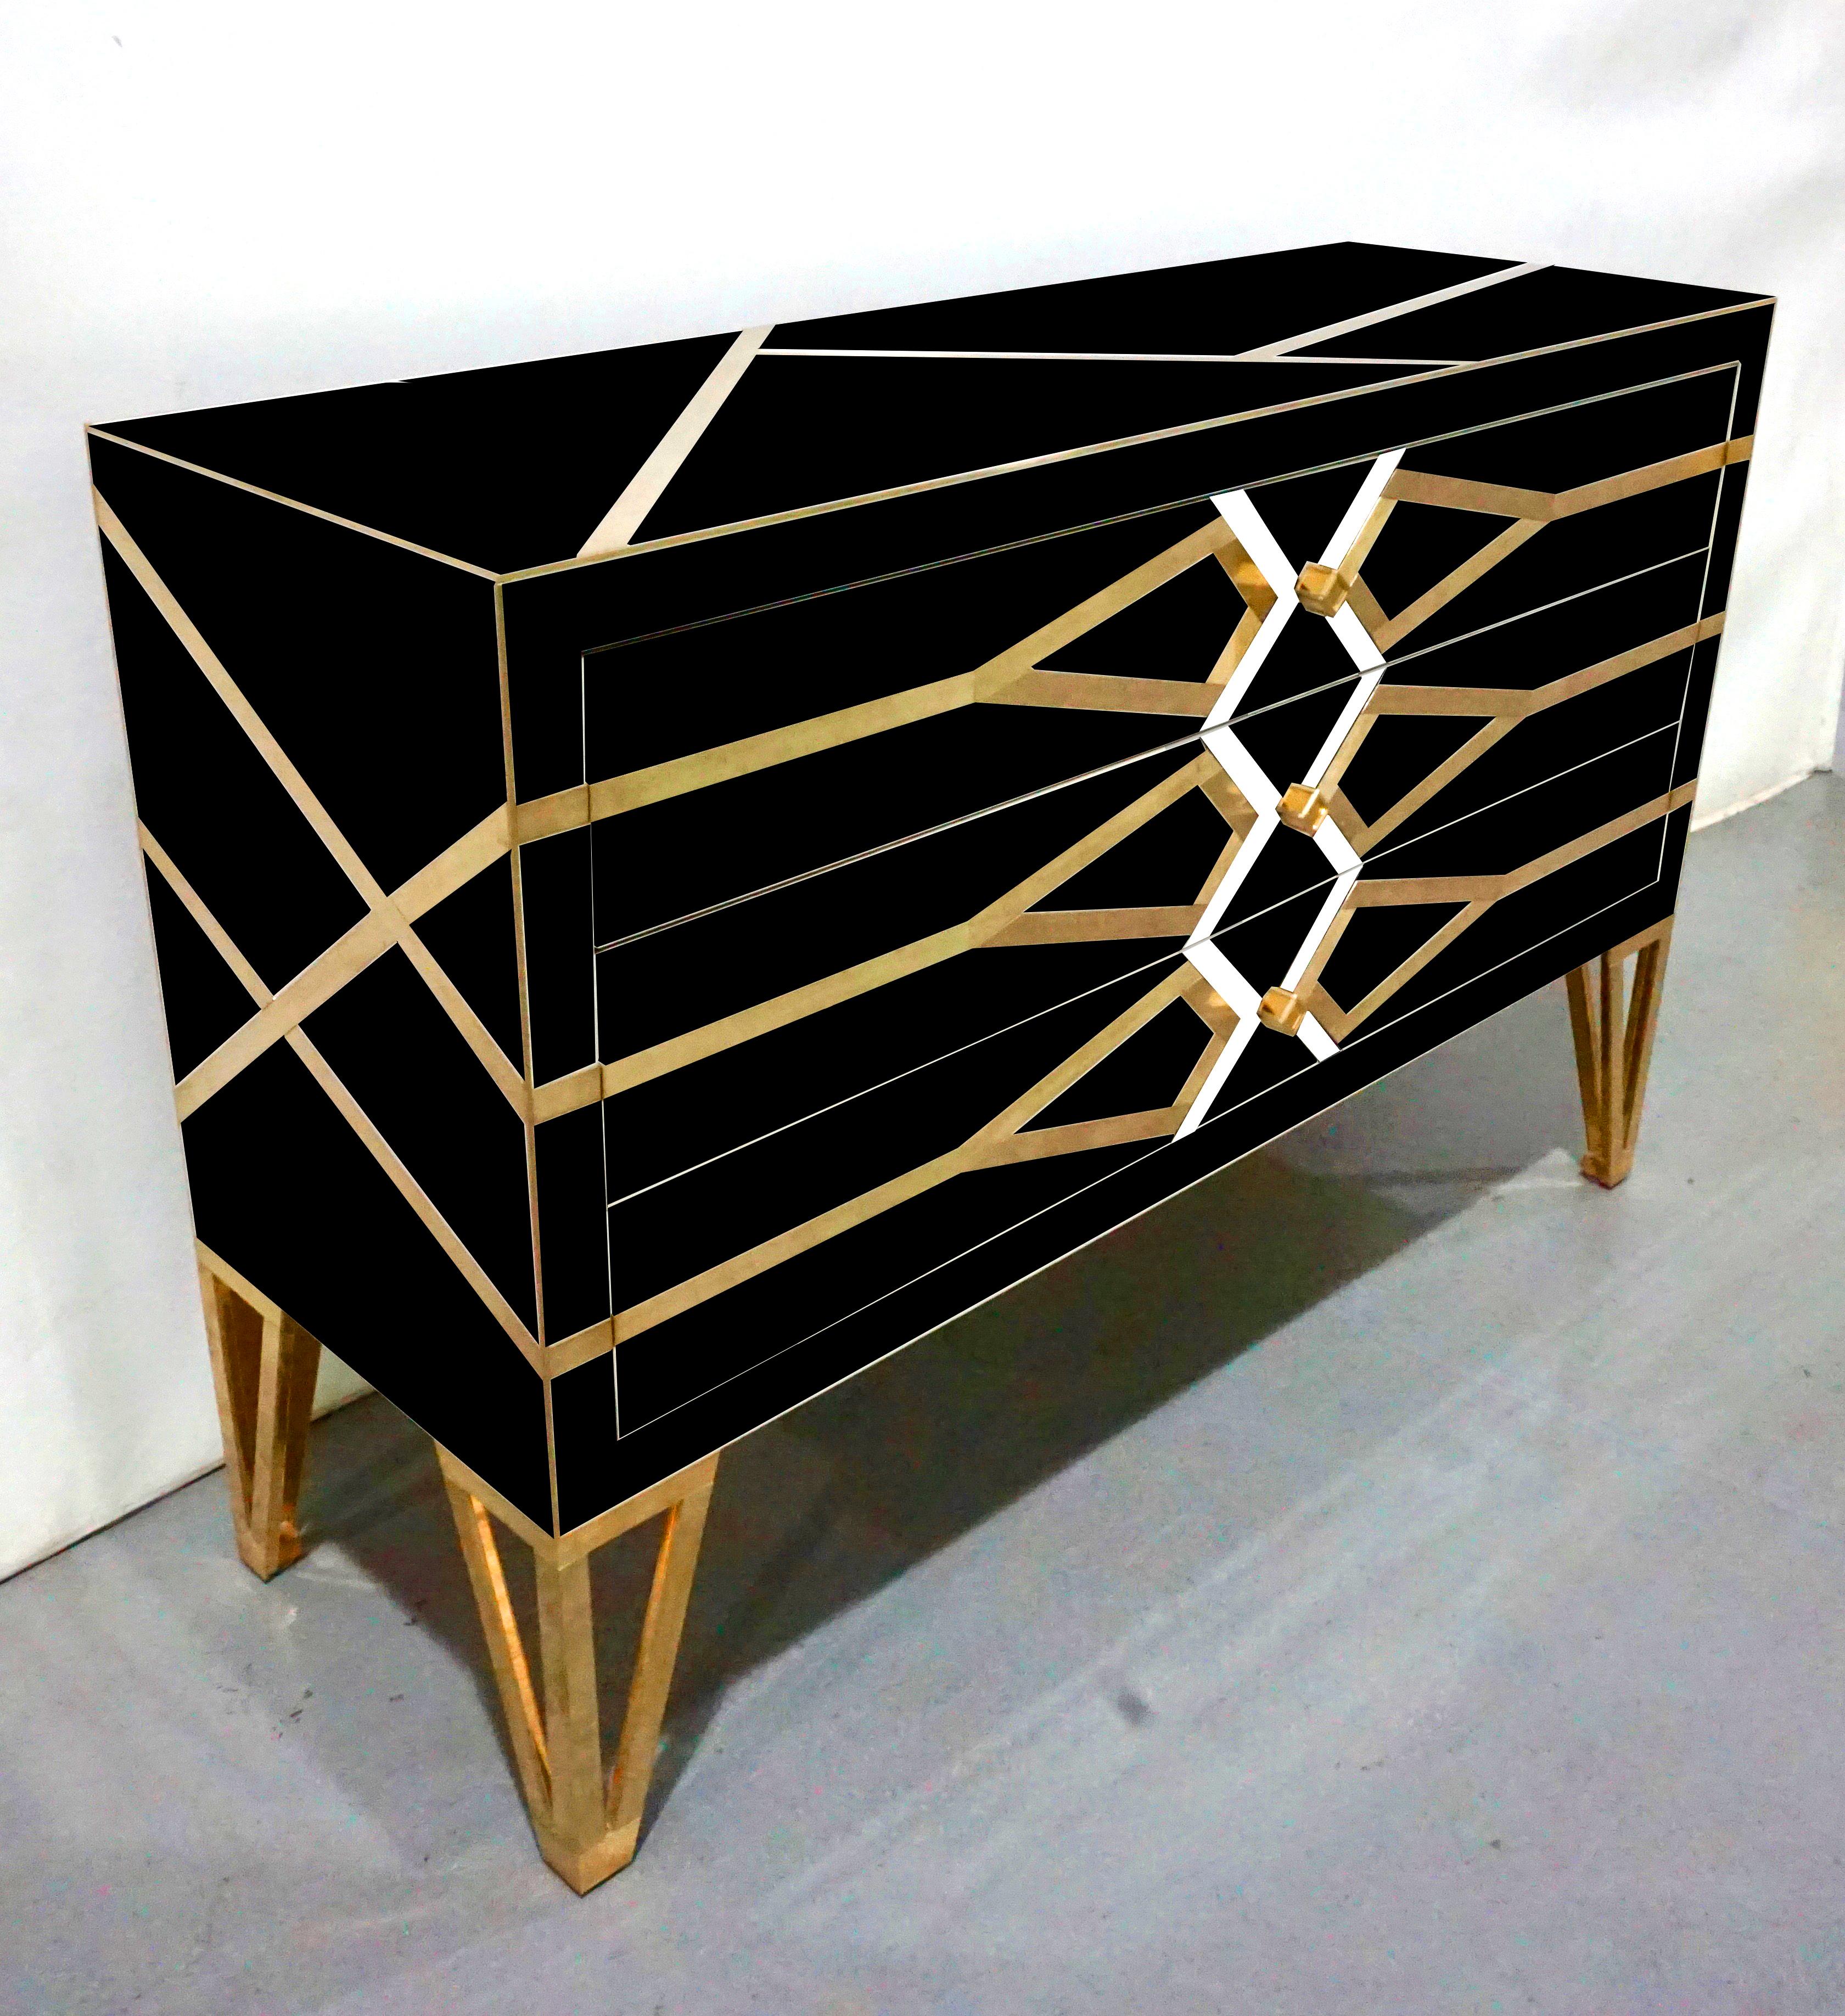 Italian three-drawer contemporary customizable commode, entirely handmade, exclusive modern Art Deco design by Cosulich Interiors, showing high quality and elegance of execution: the surround in black opaline glass is decorated with a geometric